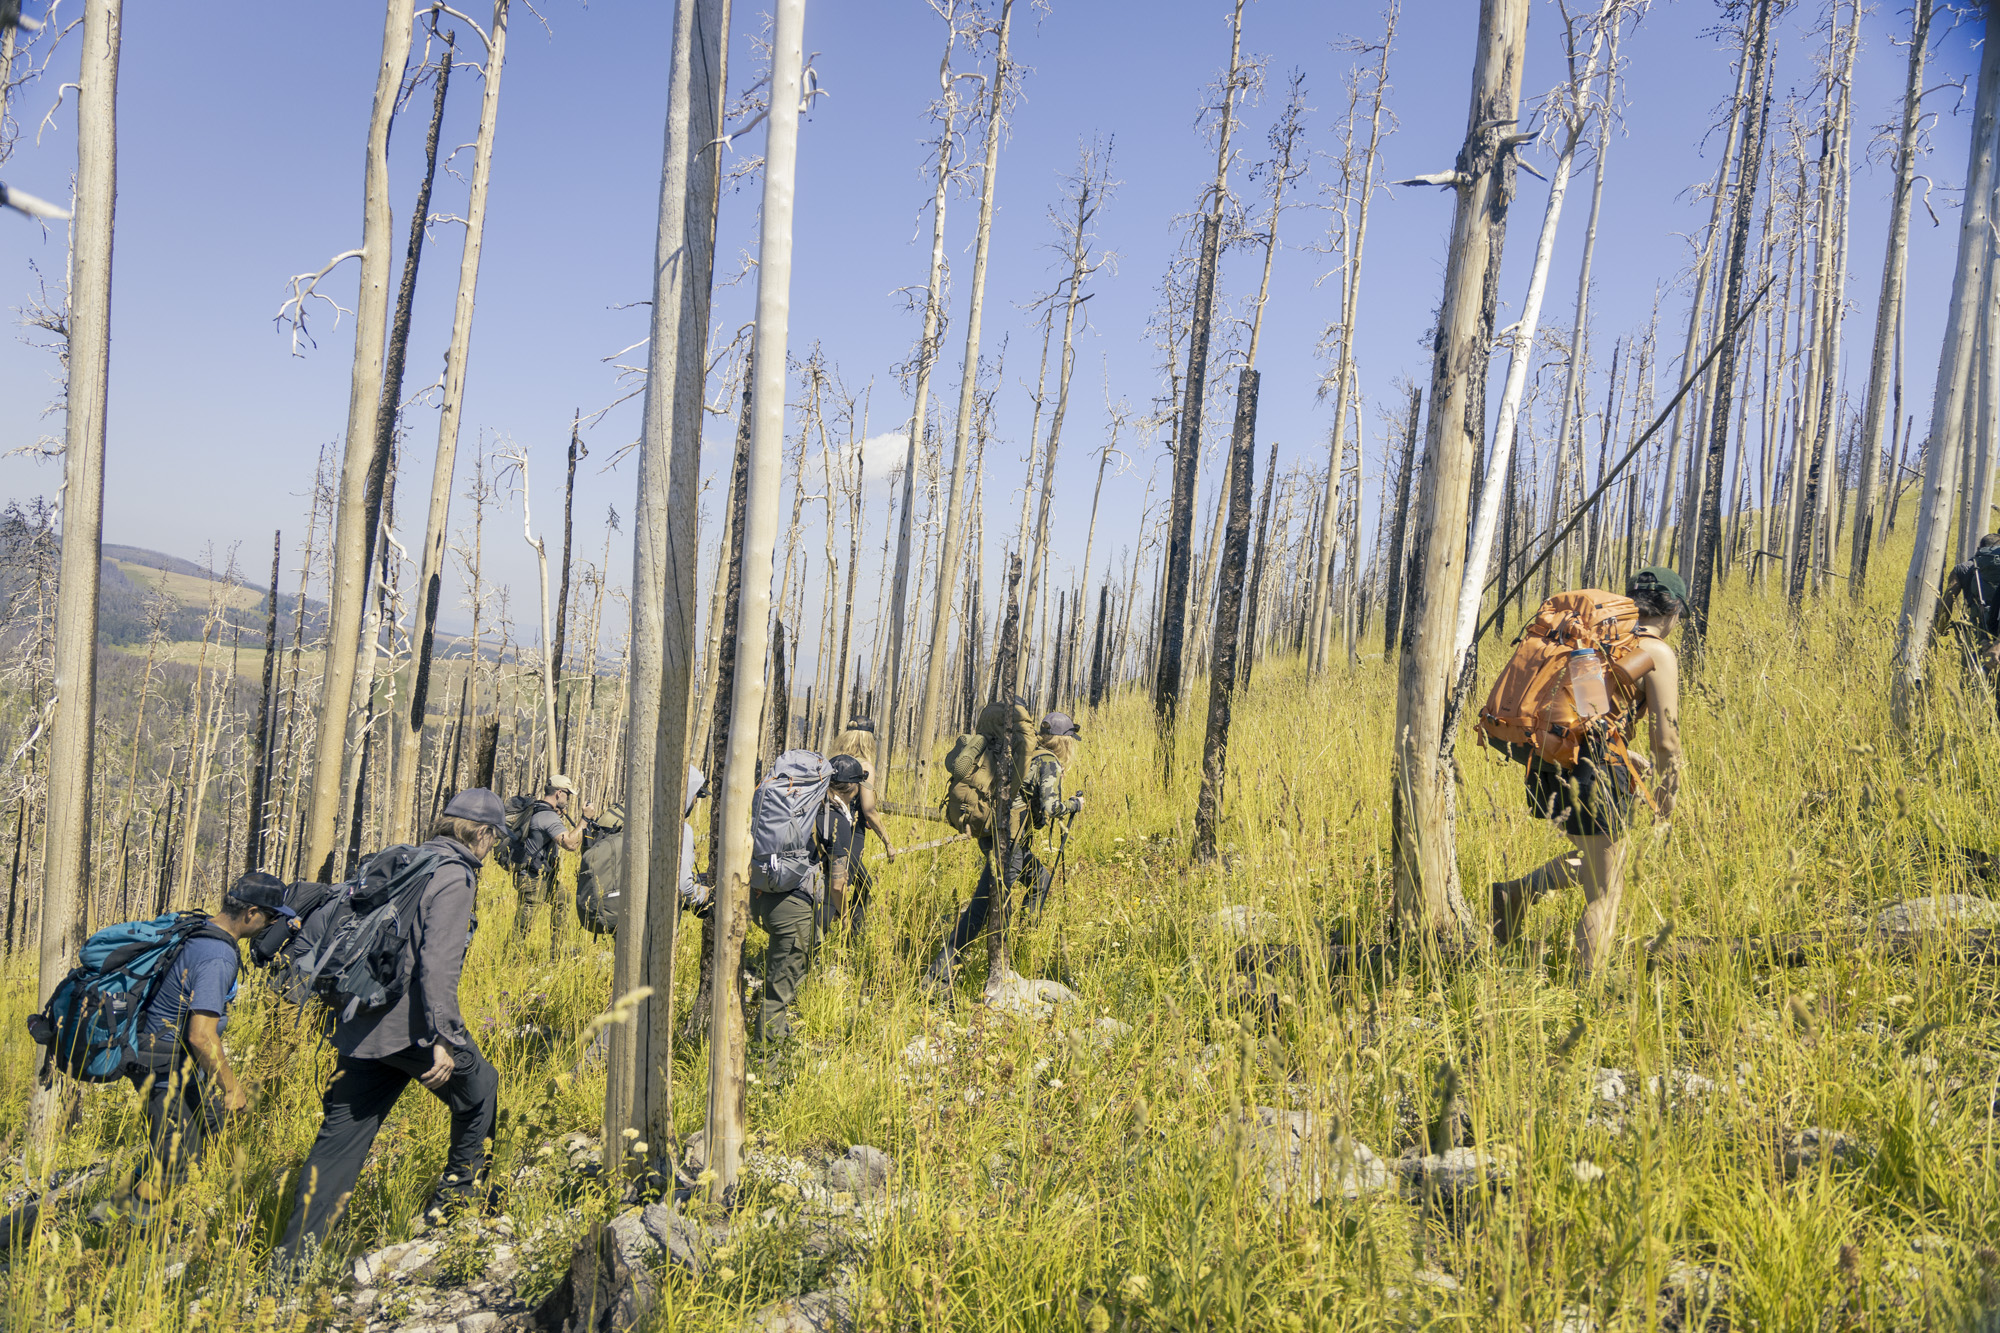 Survival Skills and Rad Gear: The 2023 Backcountry Skills Summit